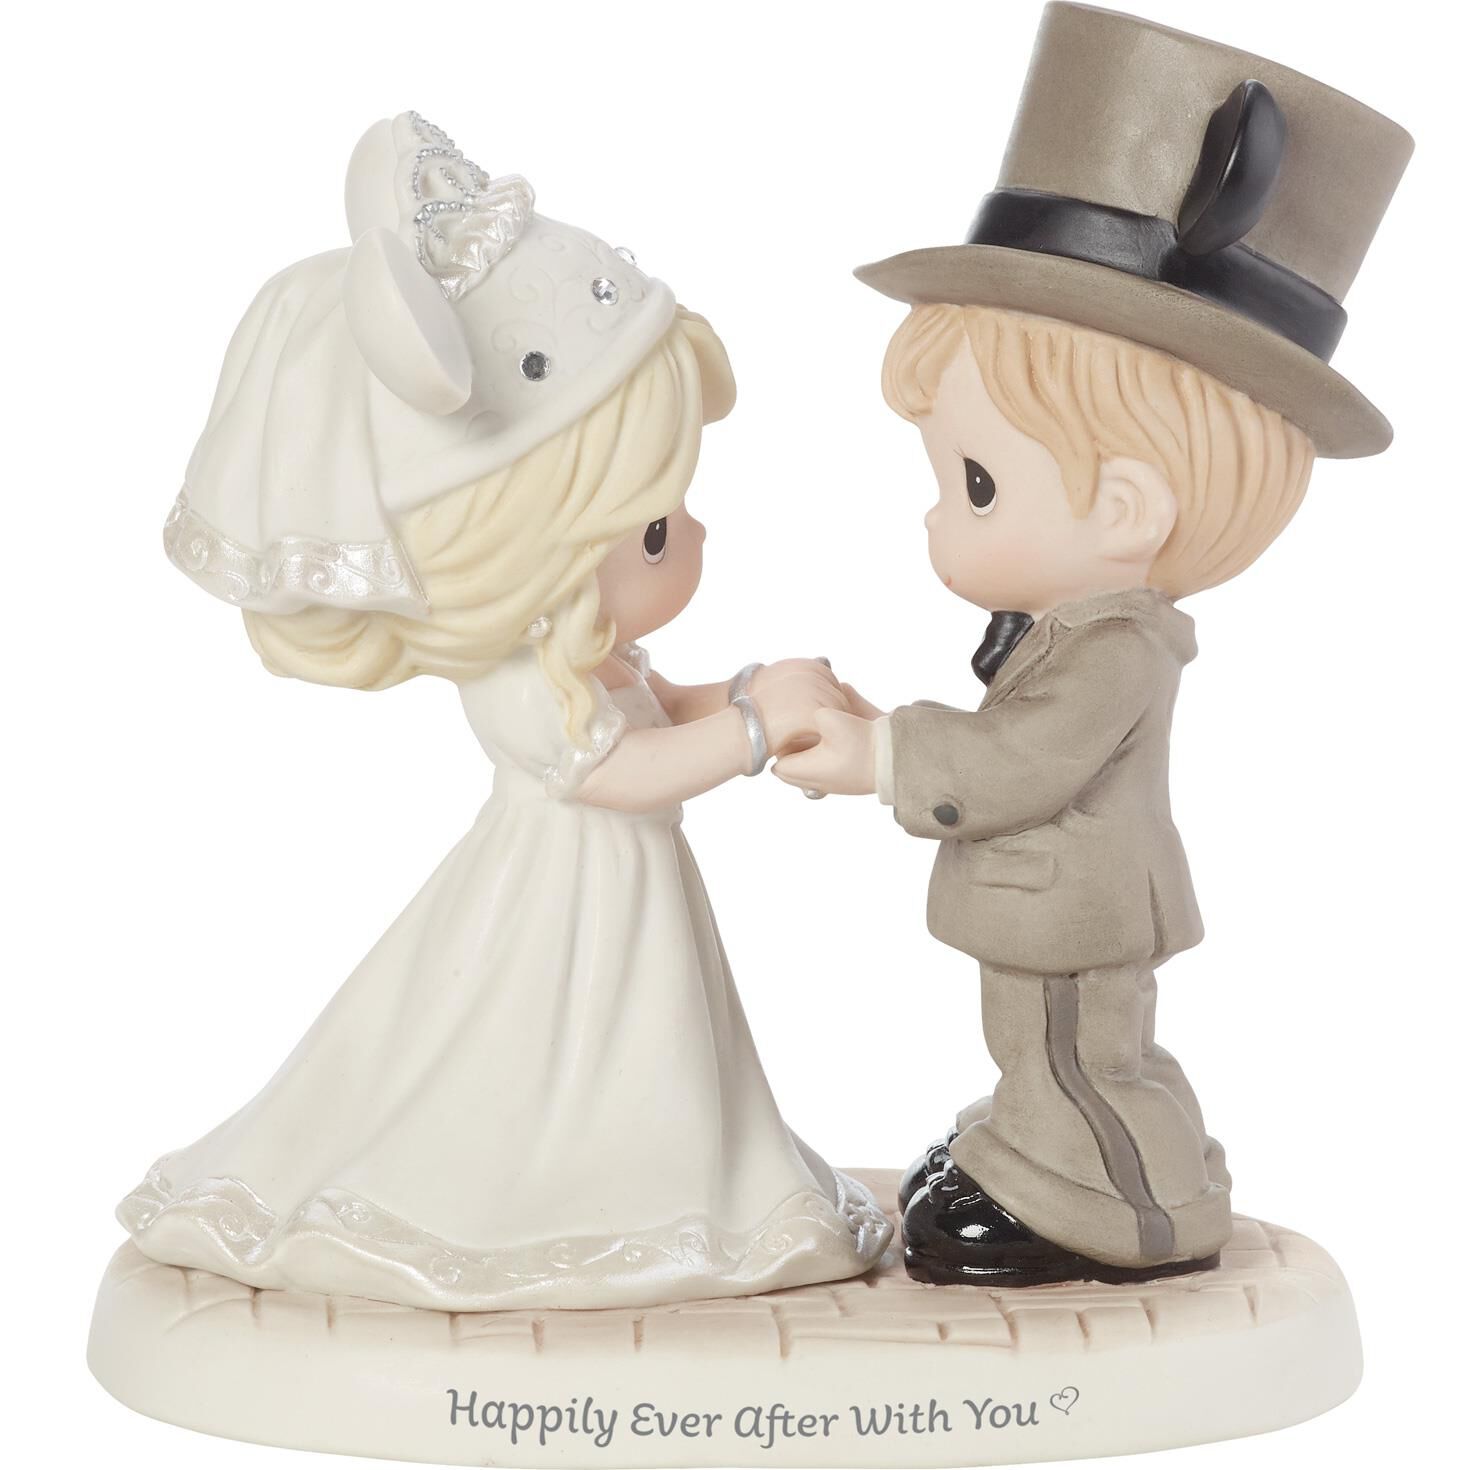 Precious Moments Happily Ever After Disney Wedding Couple Figurine, 6" for only USD 80.99 | Hallmark